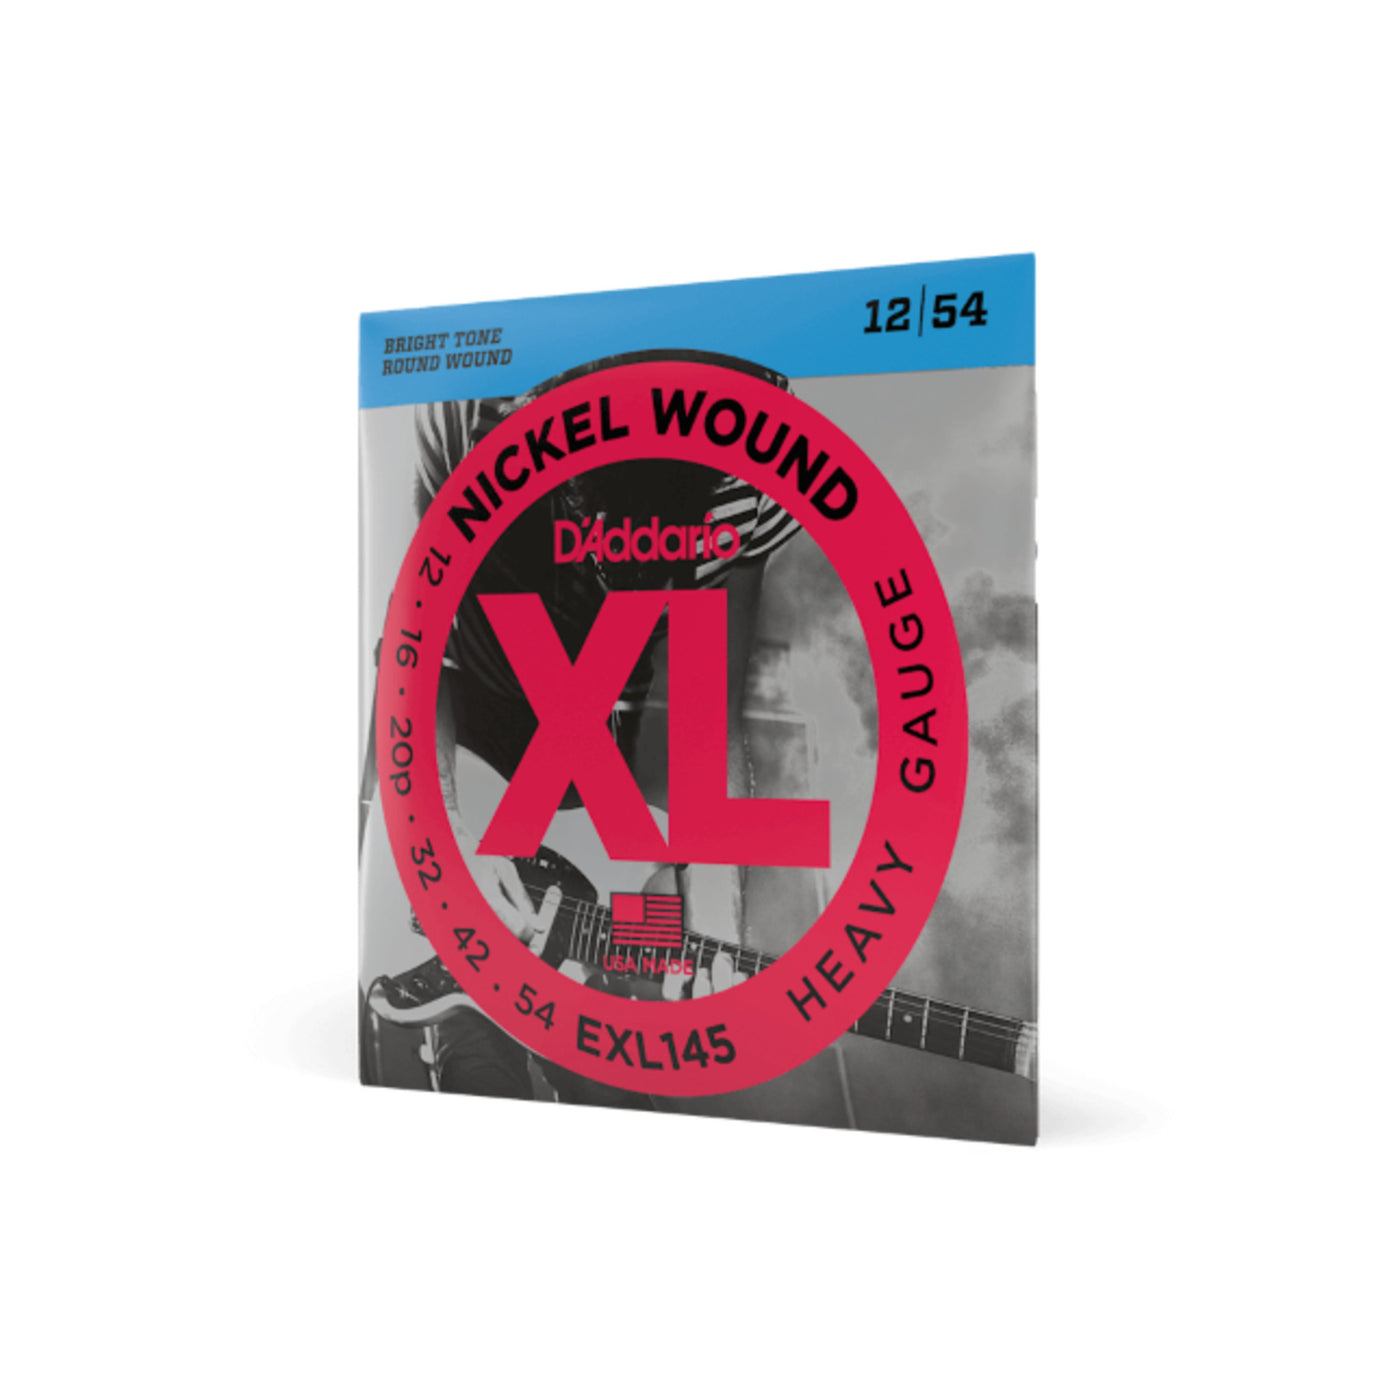 D'Addario Nickel Wound Electric Guitar Strings, Heavy, 12-54 with Plain Steel 3rd (EXL145)